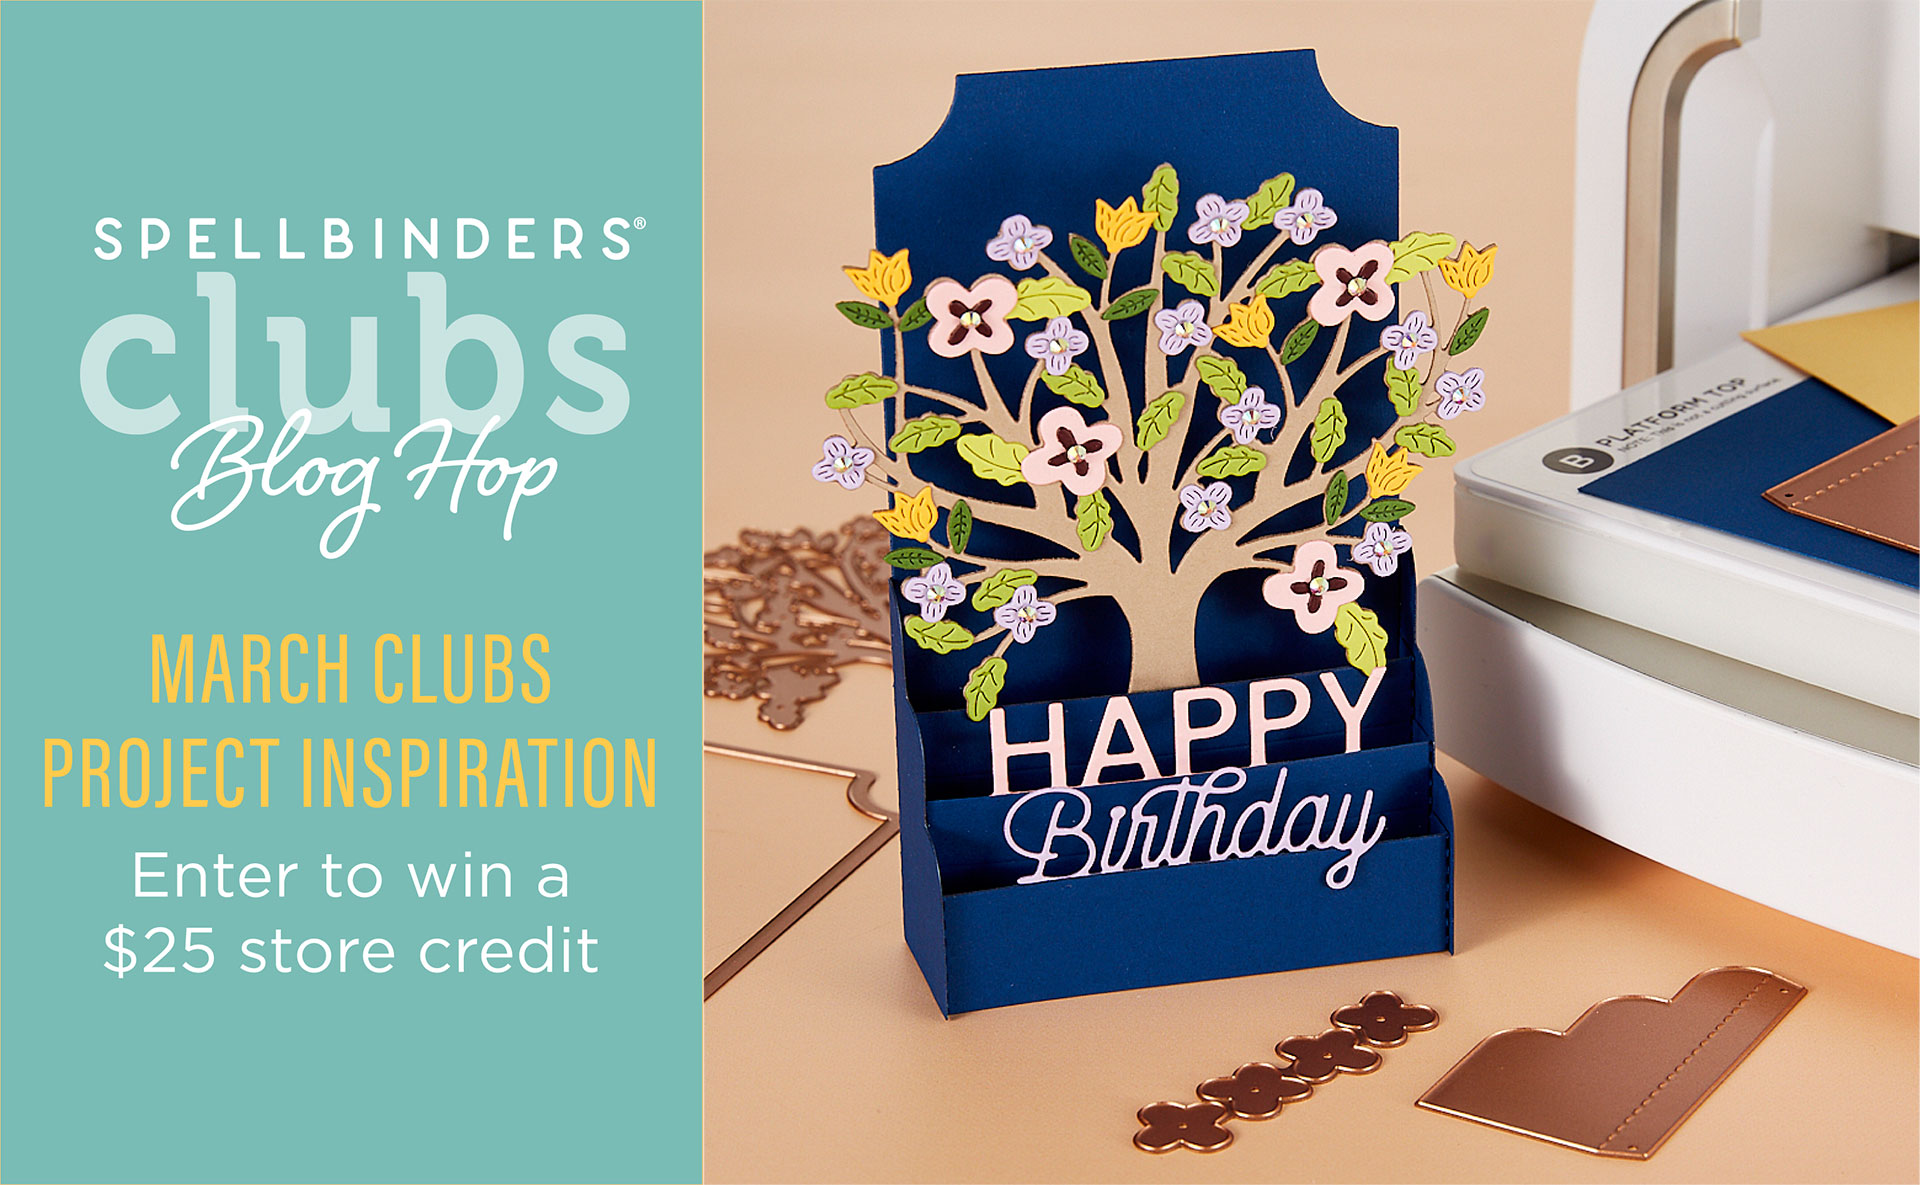 Spellbinders Fave 2023 Club Products Blog Hop + Giveaways* - Cut, Color, &  Create